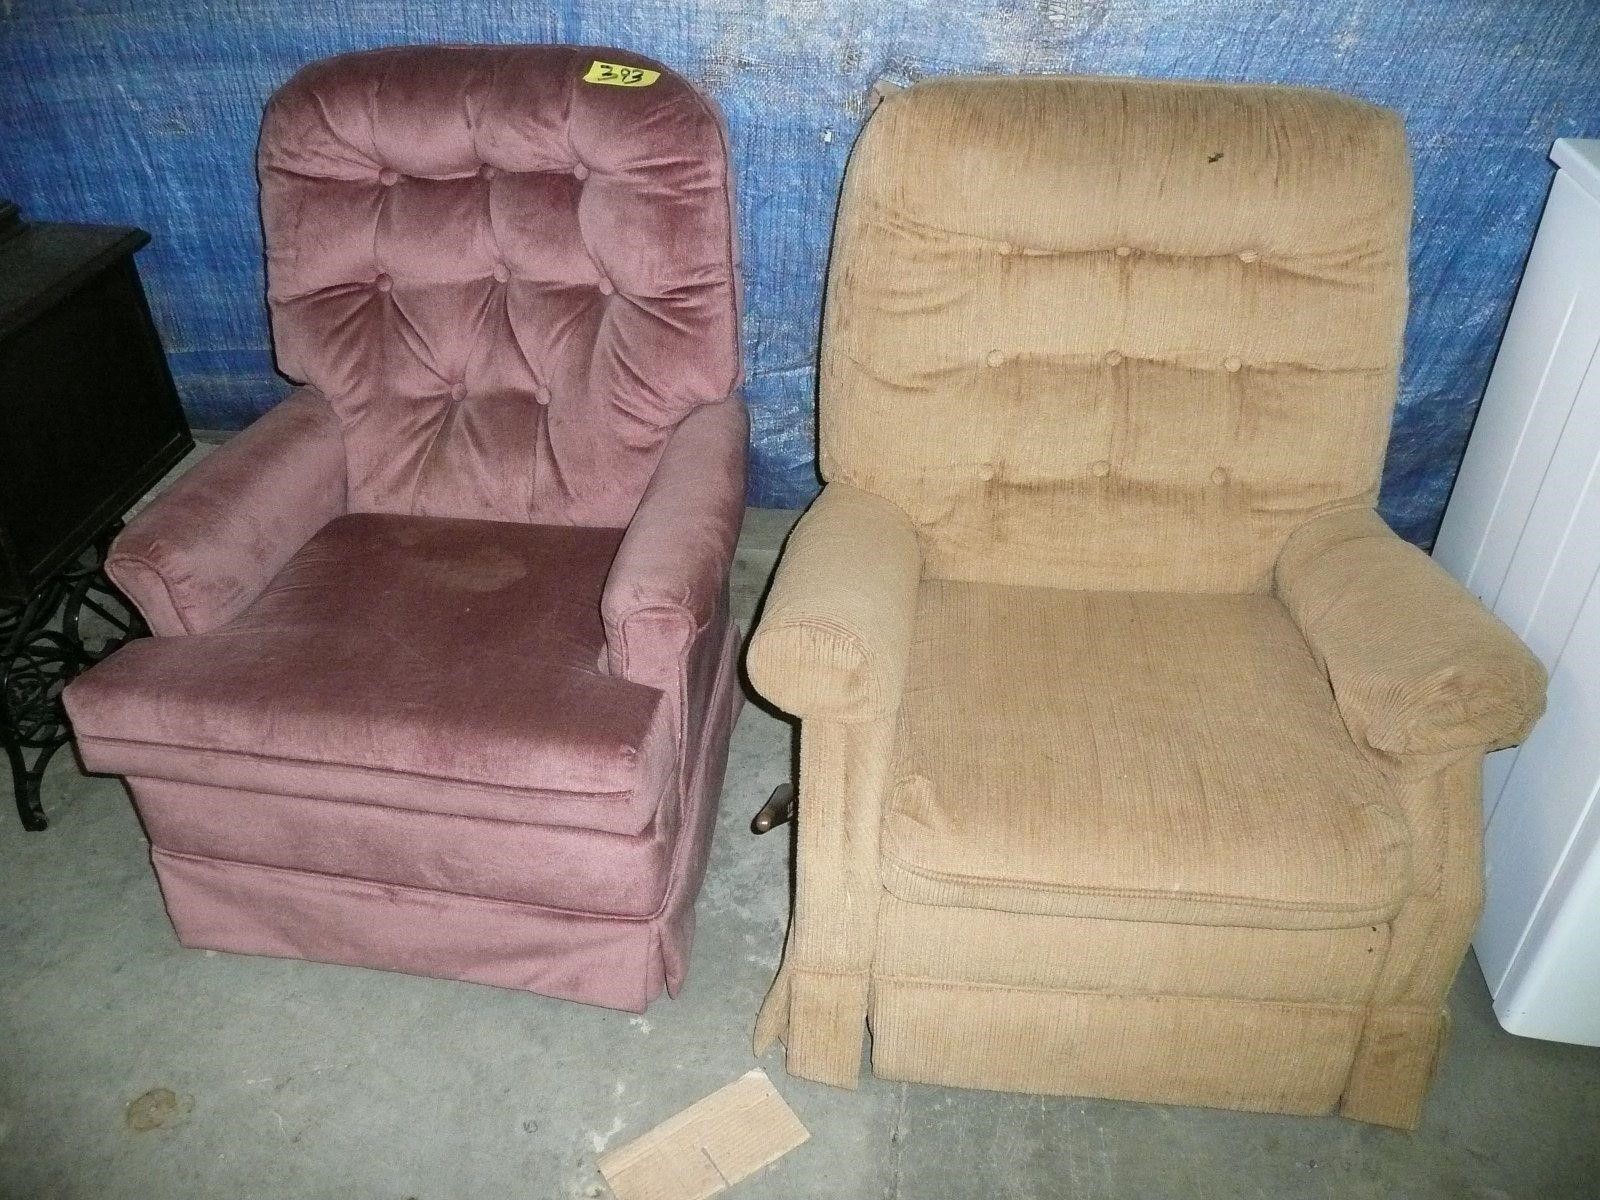 2 Apholsterd Chairs 1 is Recliner